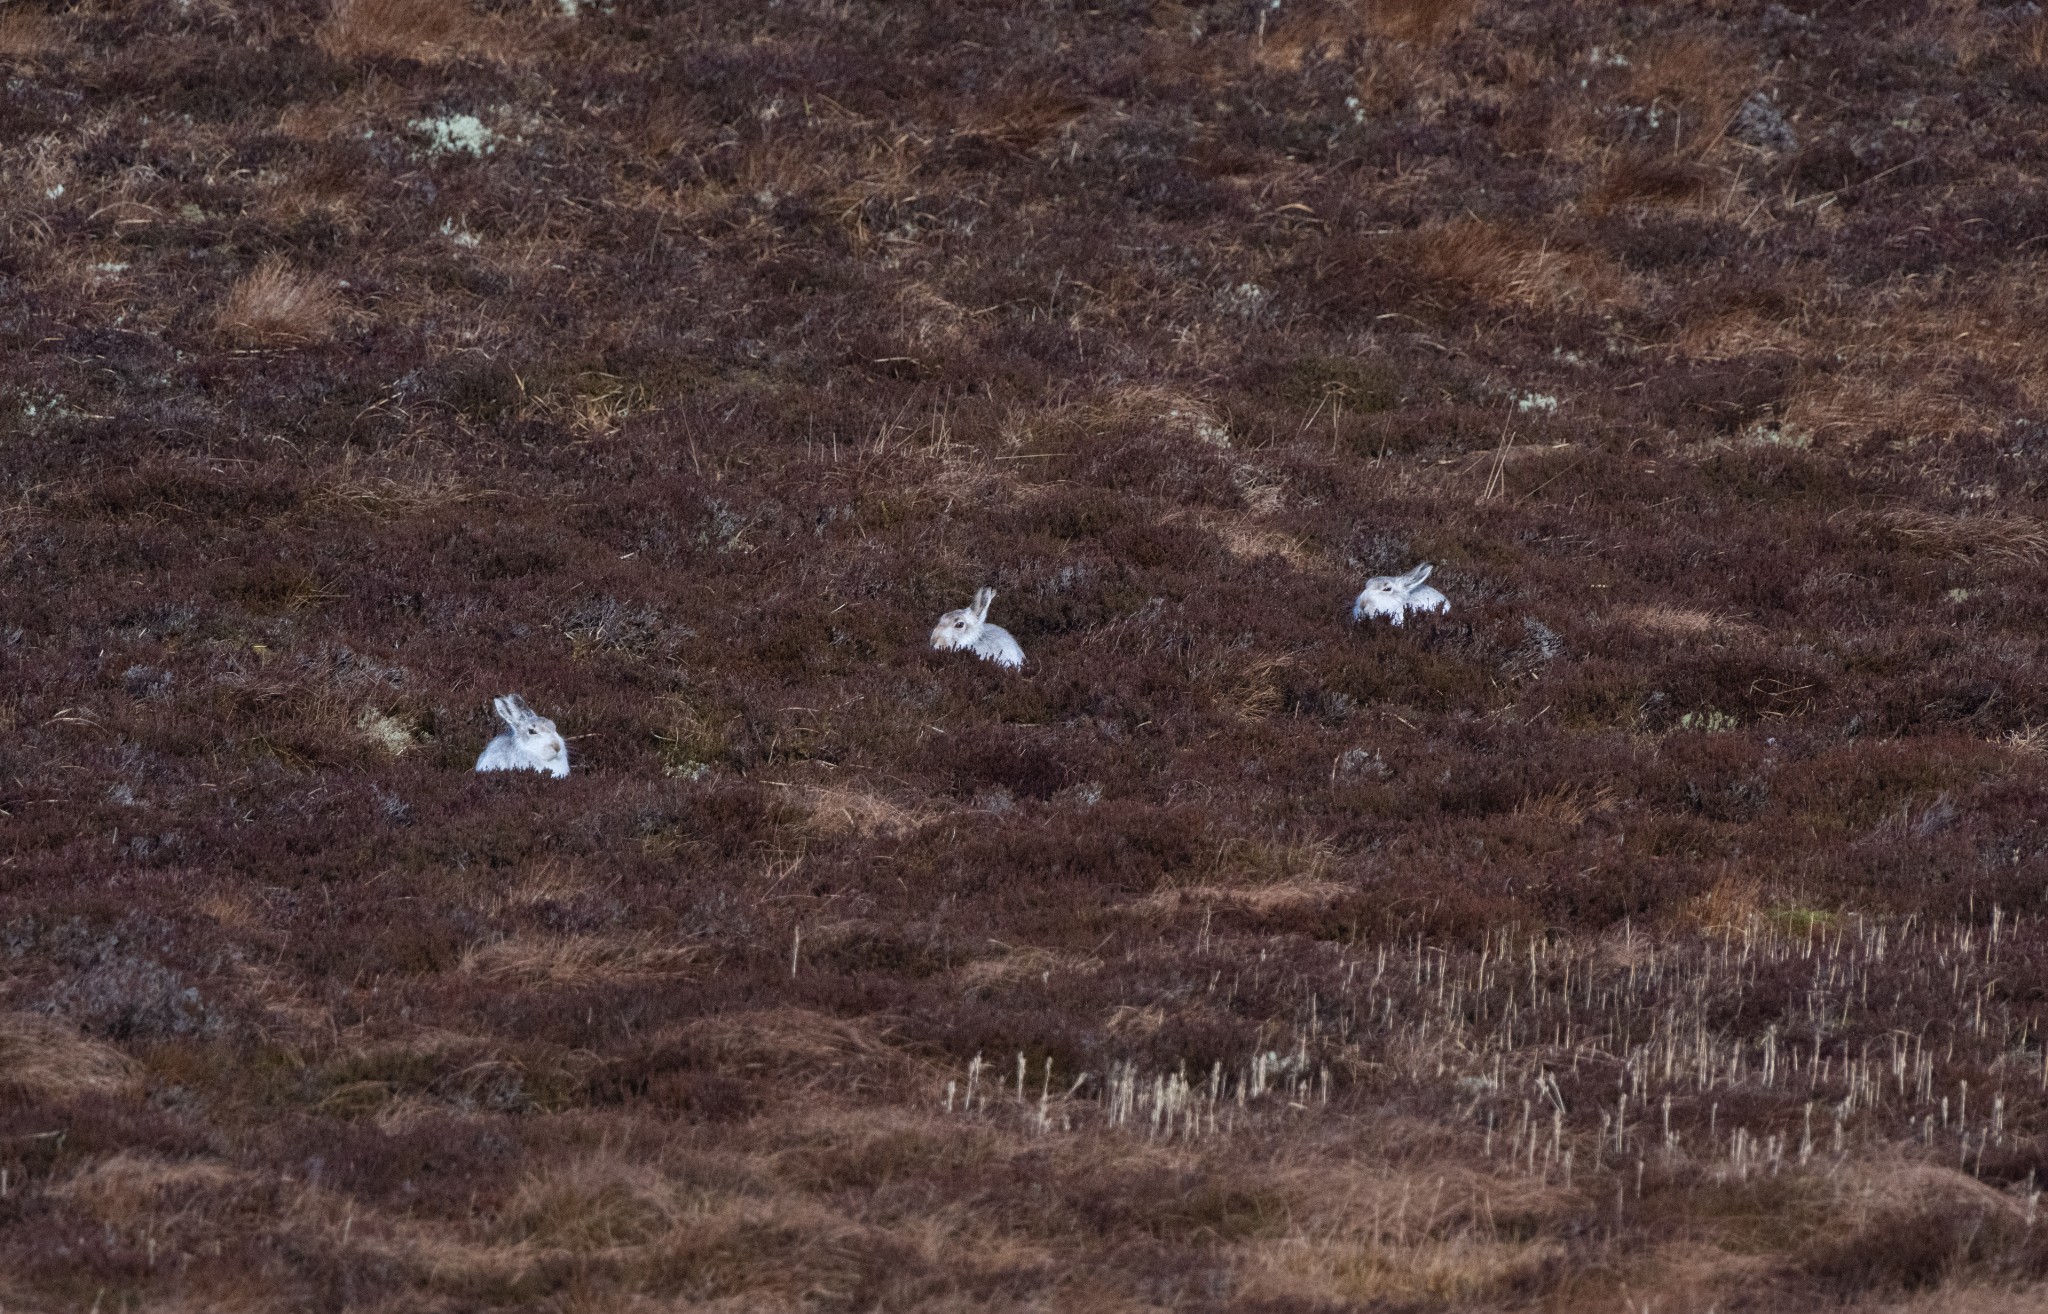 Mountain hares in Hoy, Orkney - image by Raymond Besant